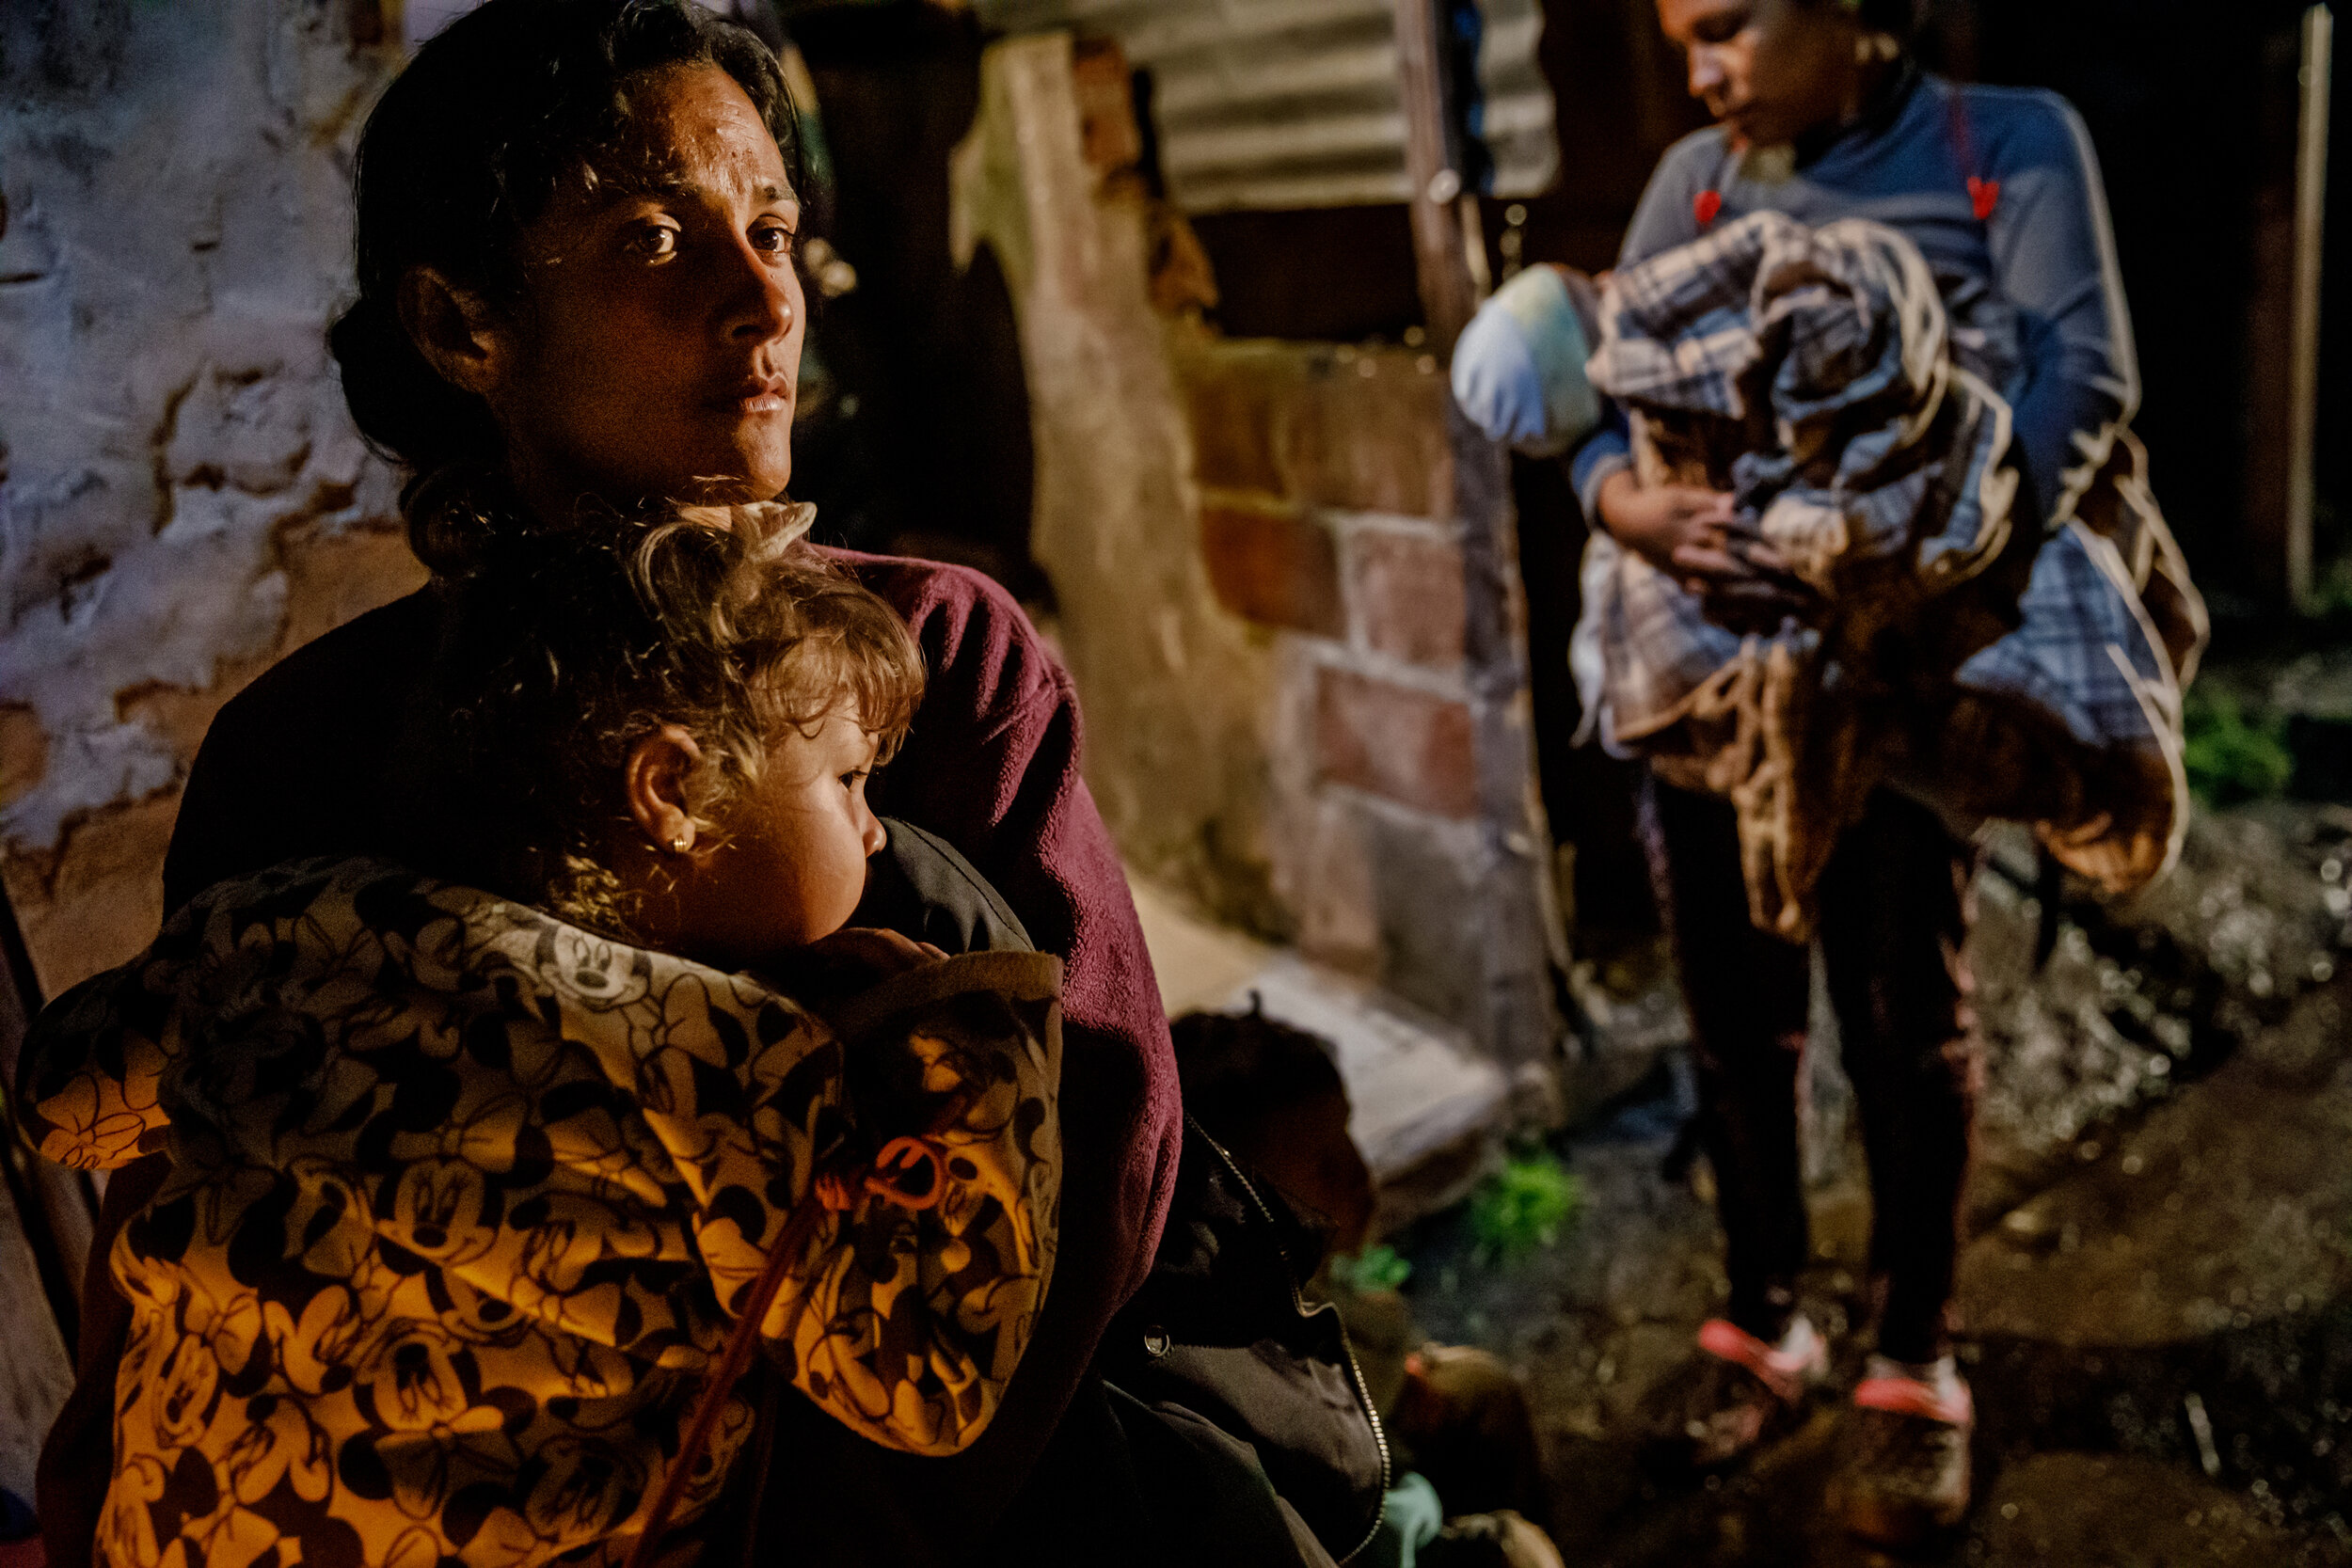  Migrant mothers holding their children watch as others disembark from the truck that transported them through the cold plateau, known as El Pramo de Berl’n the most dangerous part of the Andes to get to the other side, on the outskirts of Bucaramang